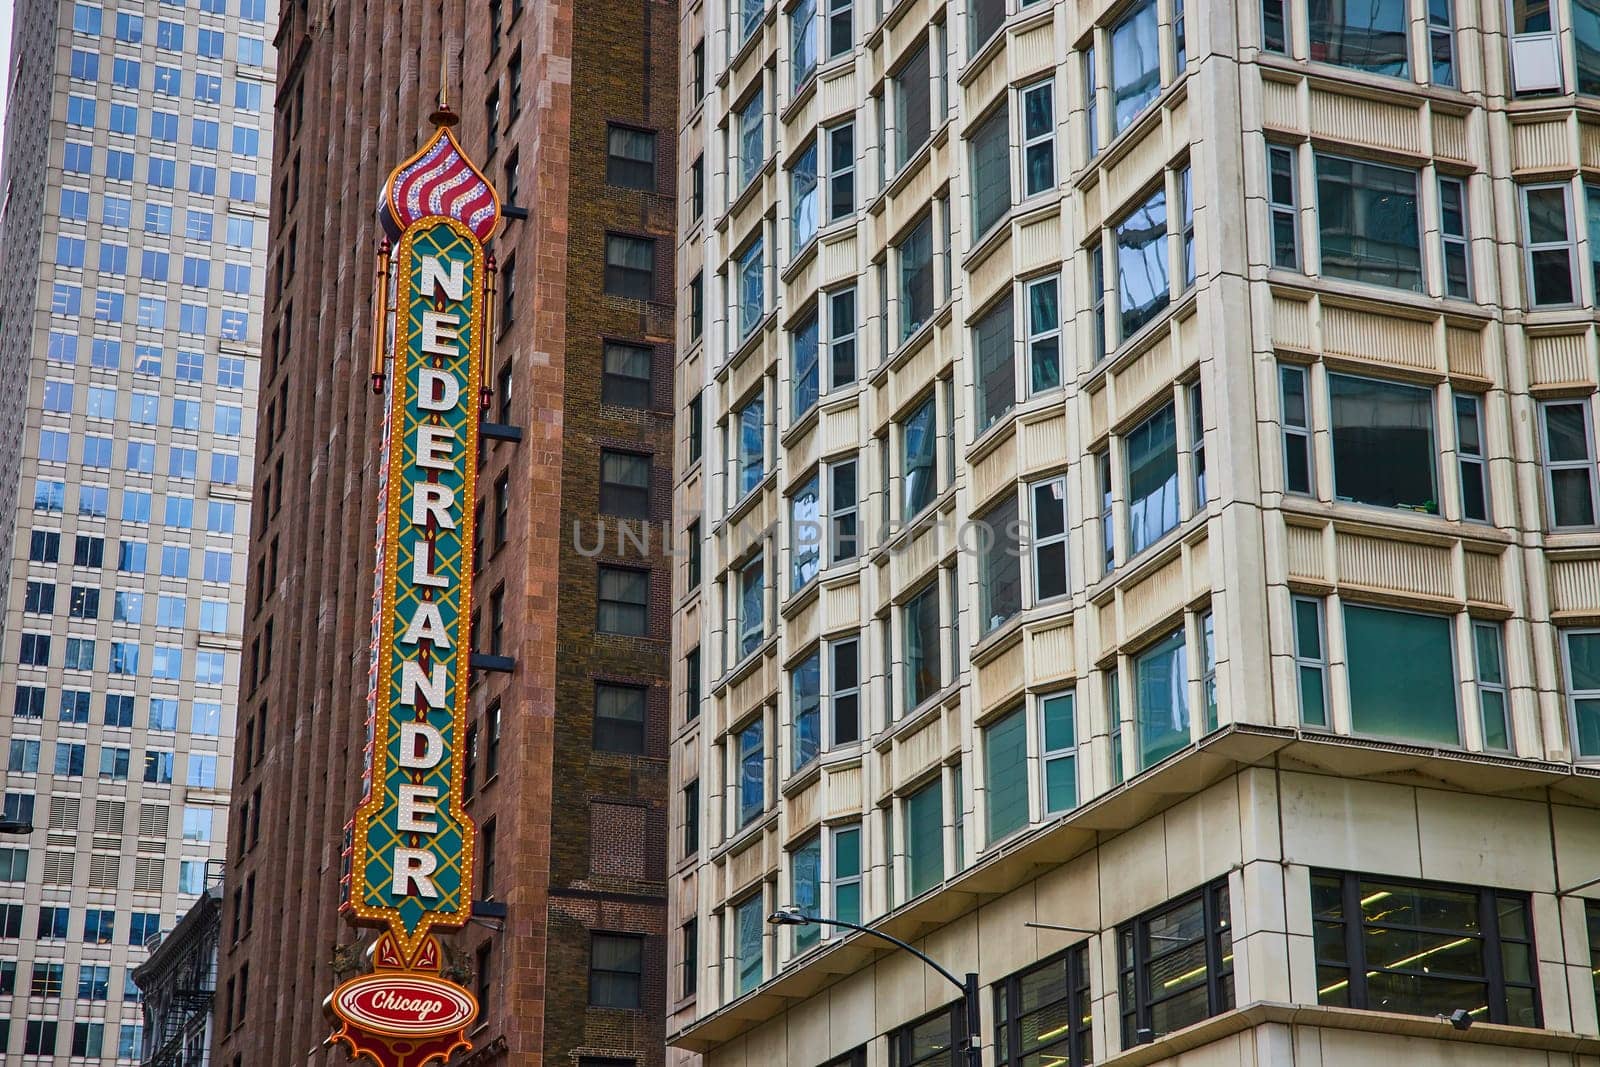 Nederlander sign on side of skyscraper building on gloomy day, Chicago Illinois, USA by njproductions